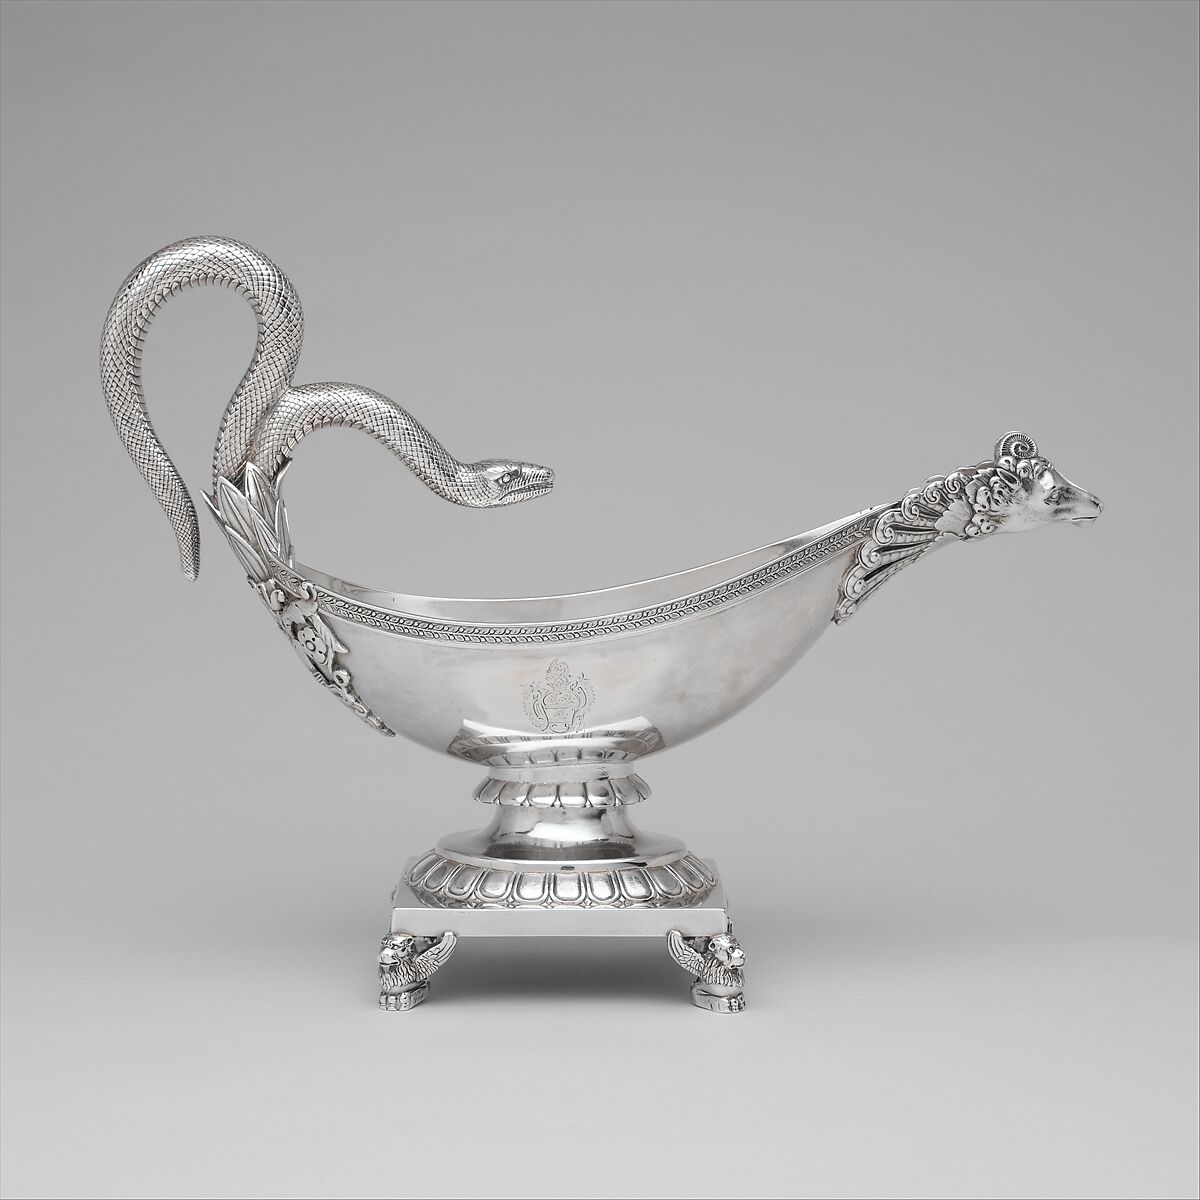 Sauceboat, Anthony Rasch (ca. 1778–1858), Silver, American 